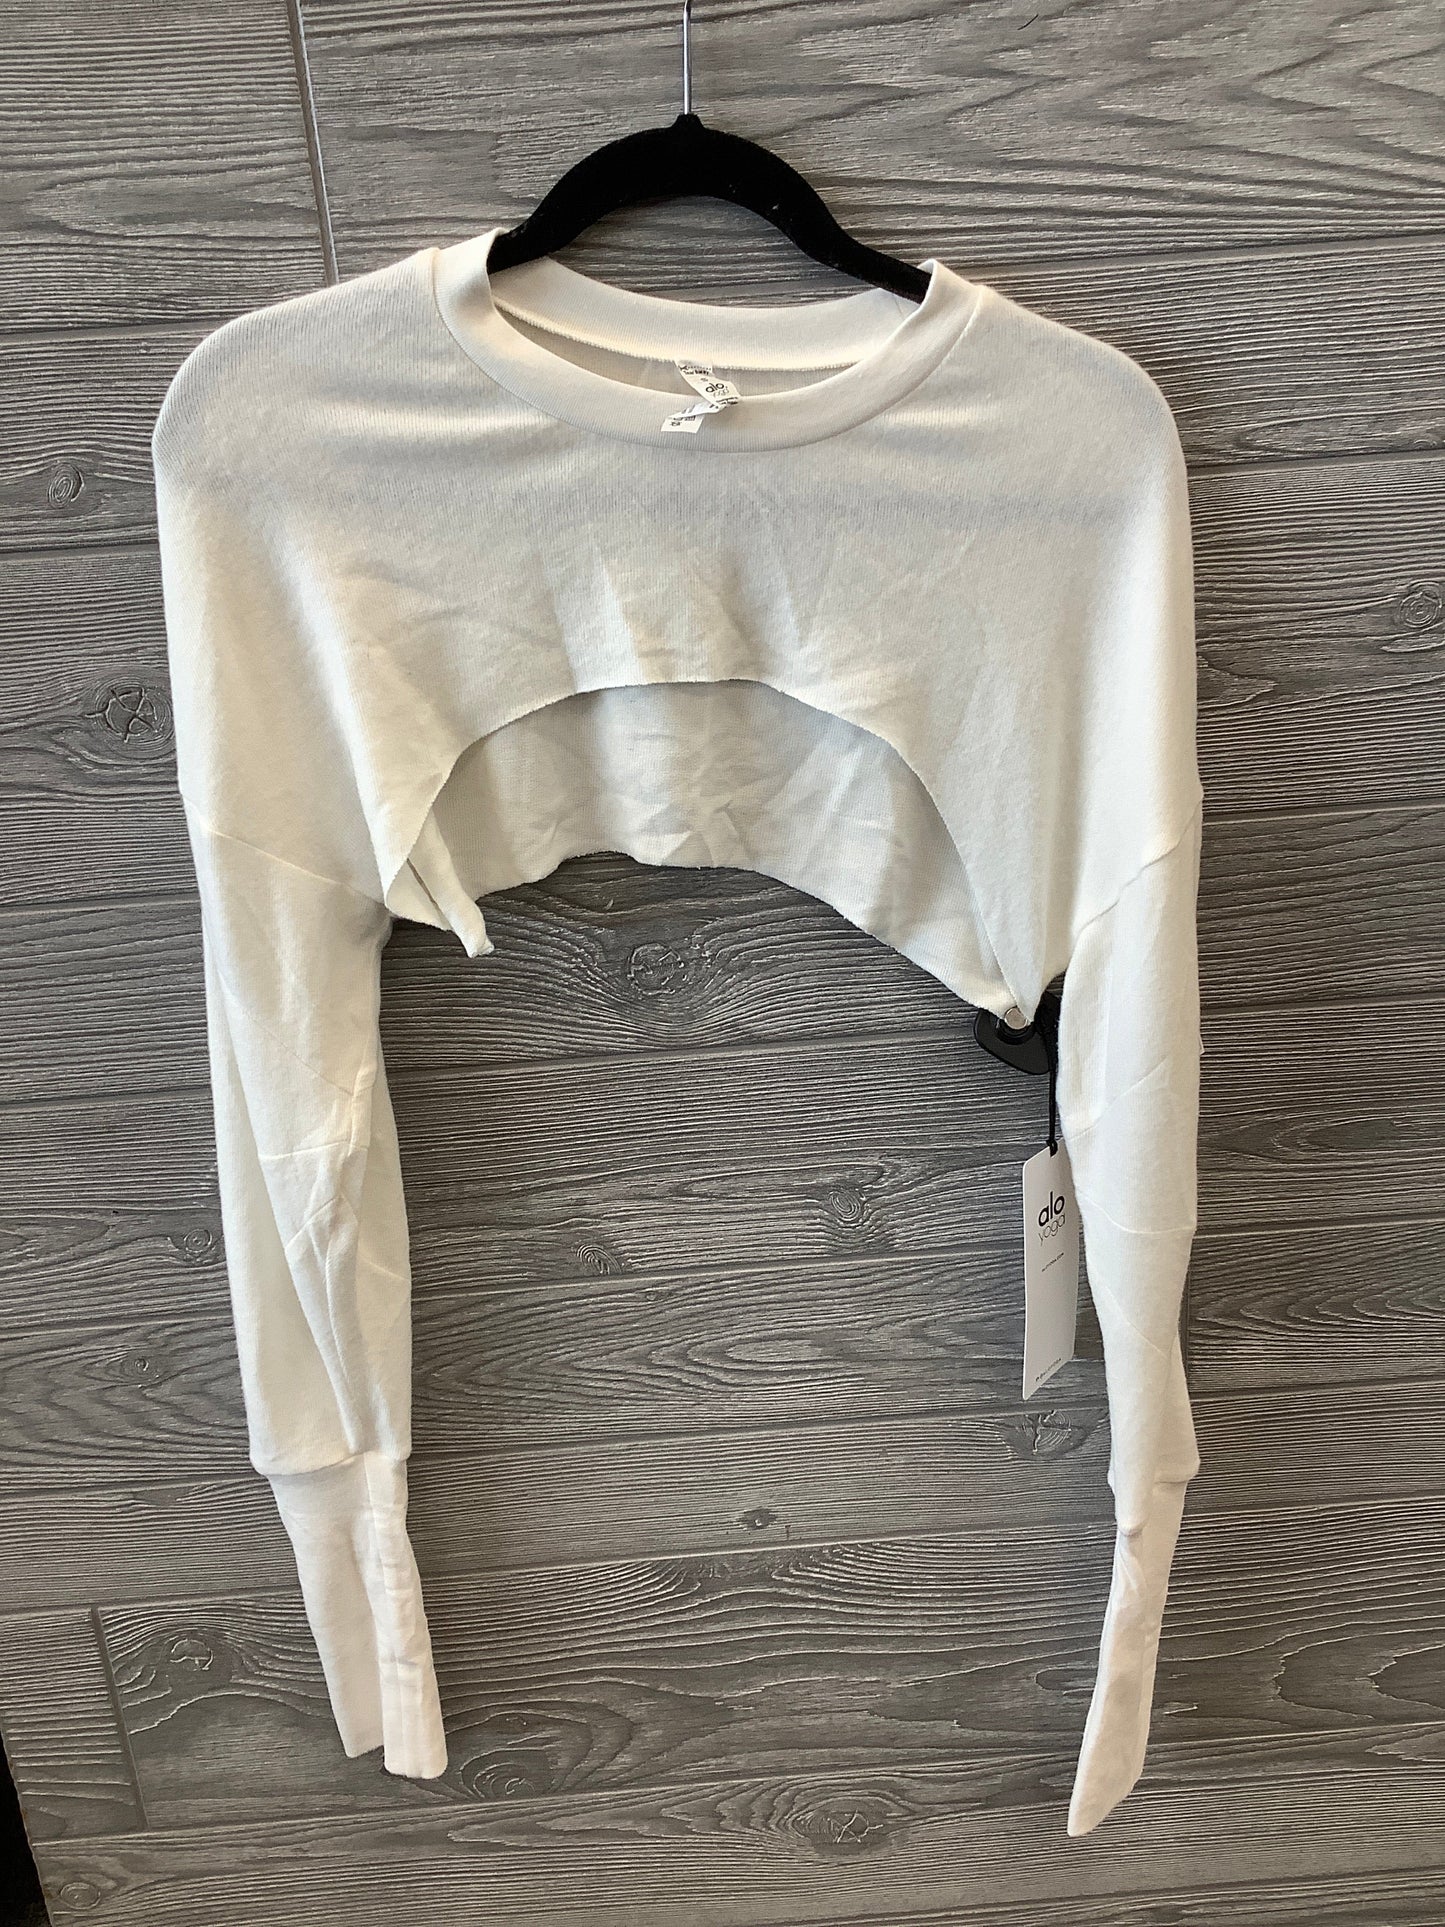 White Top Long Sleeve Alo, Size S